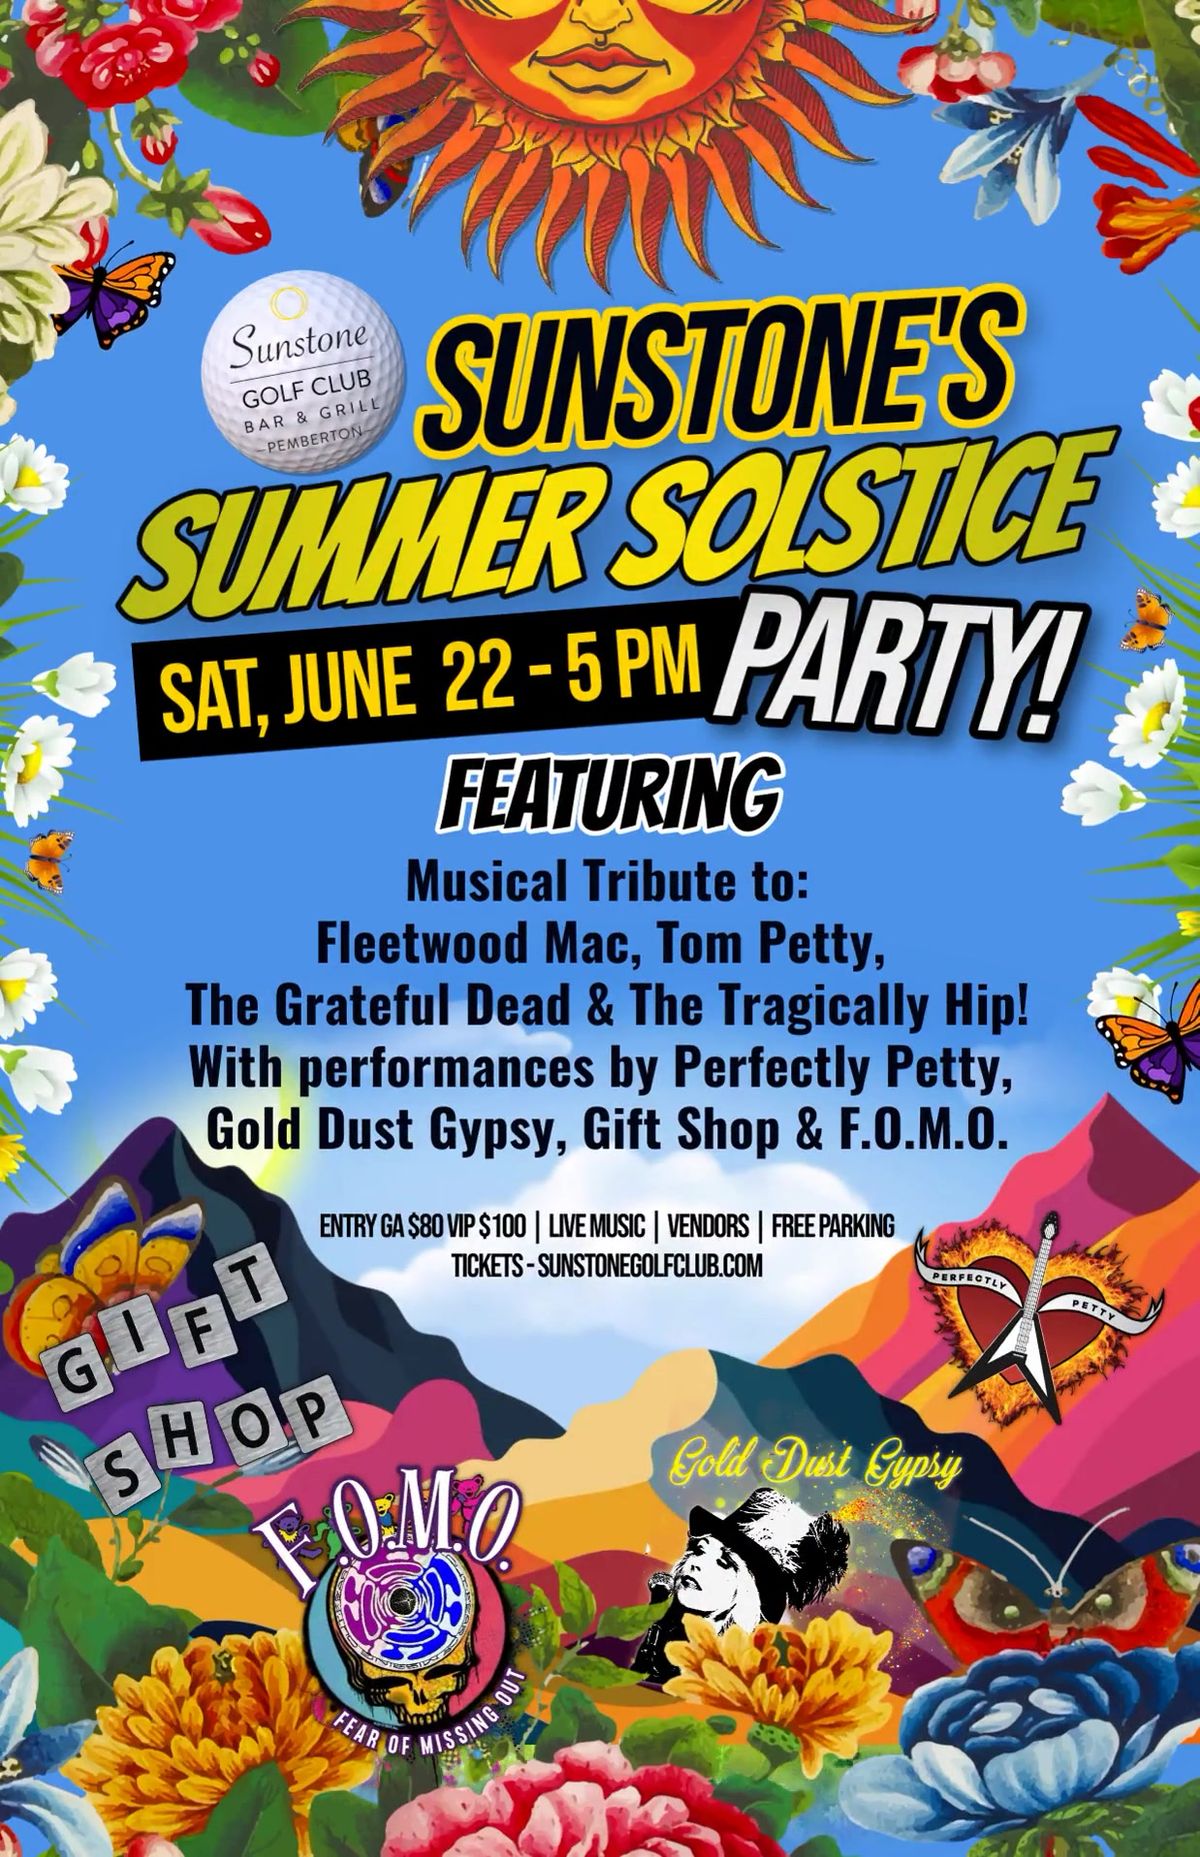 FOMO live at Sunstone's Summer Solstice Party